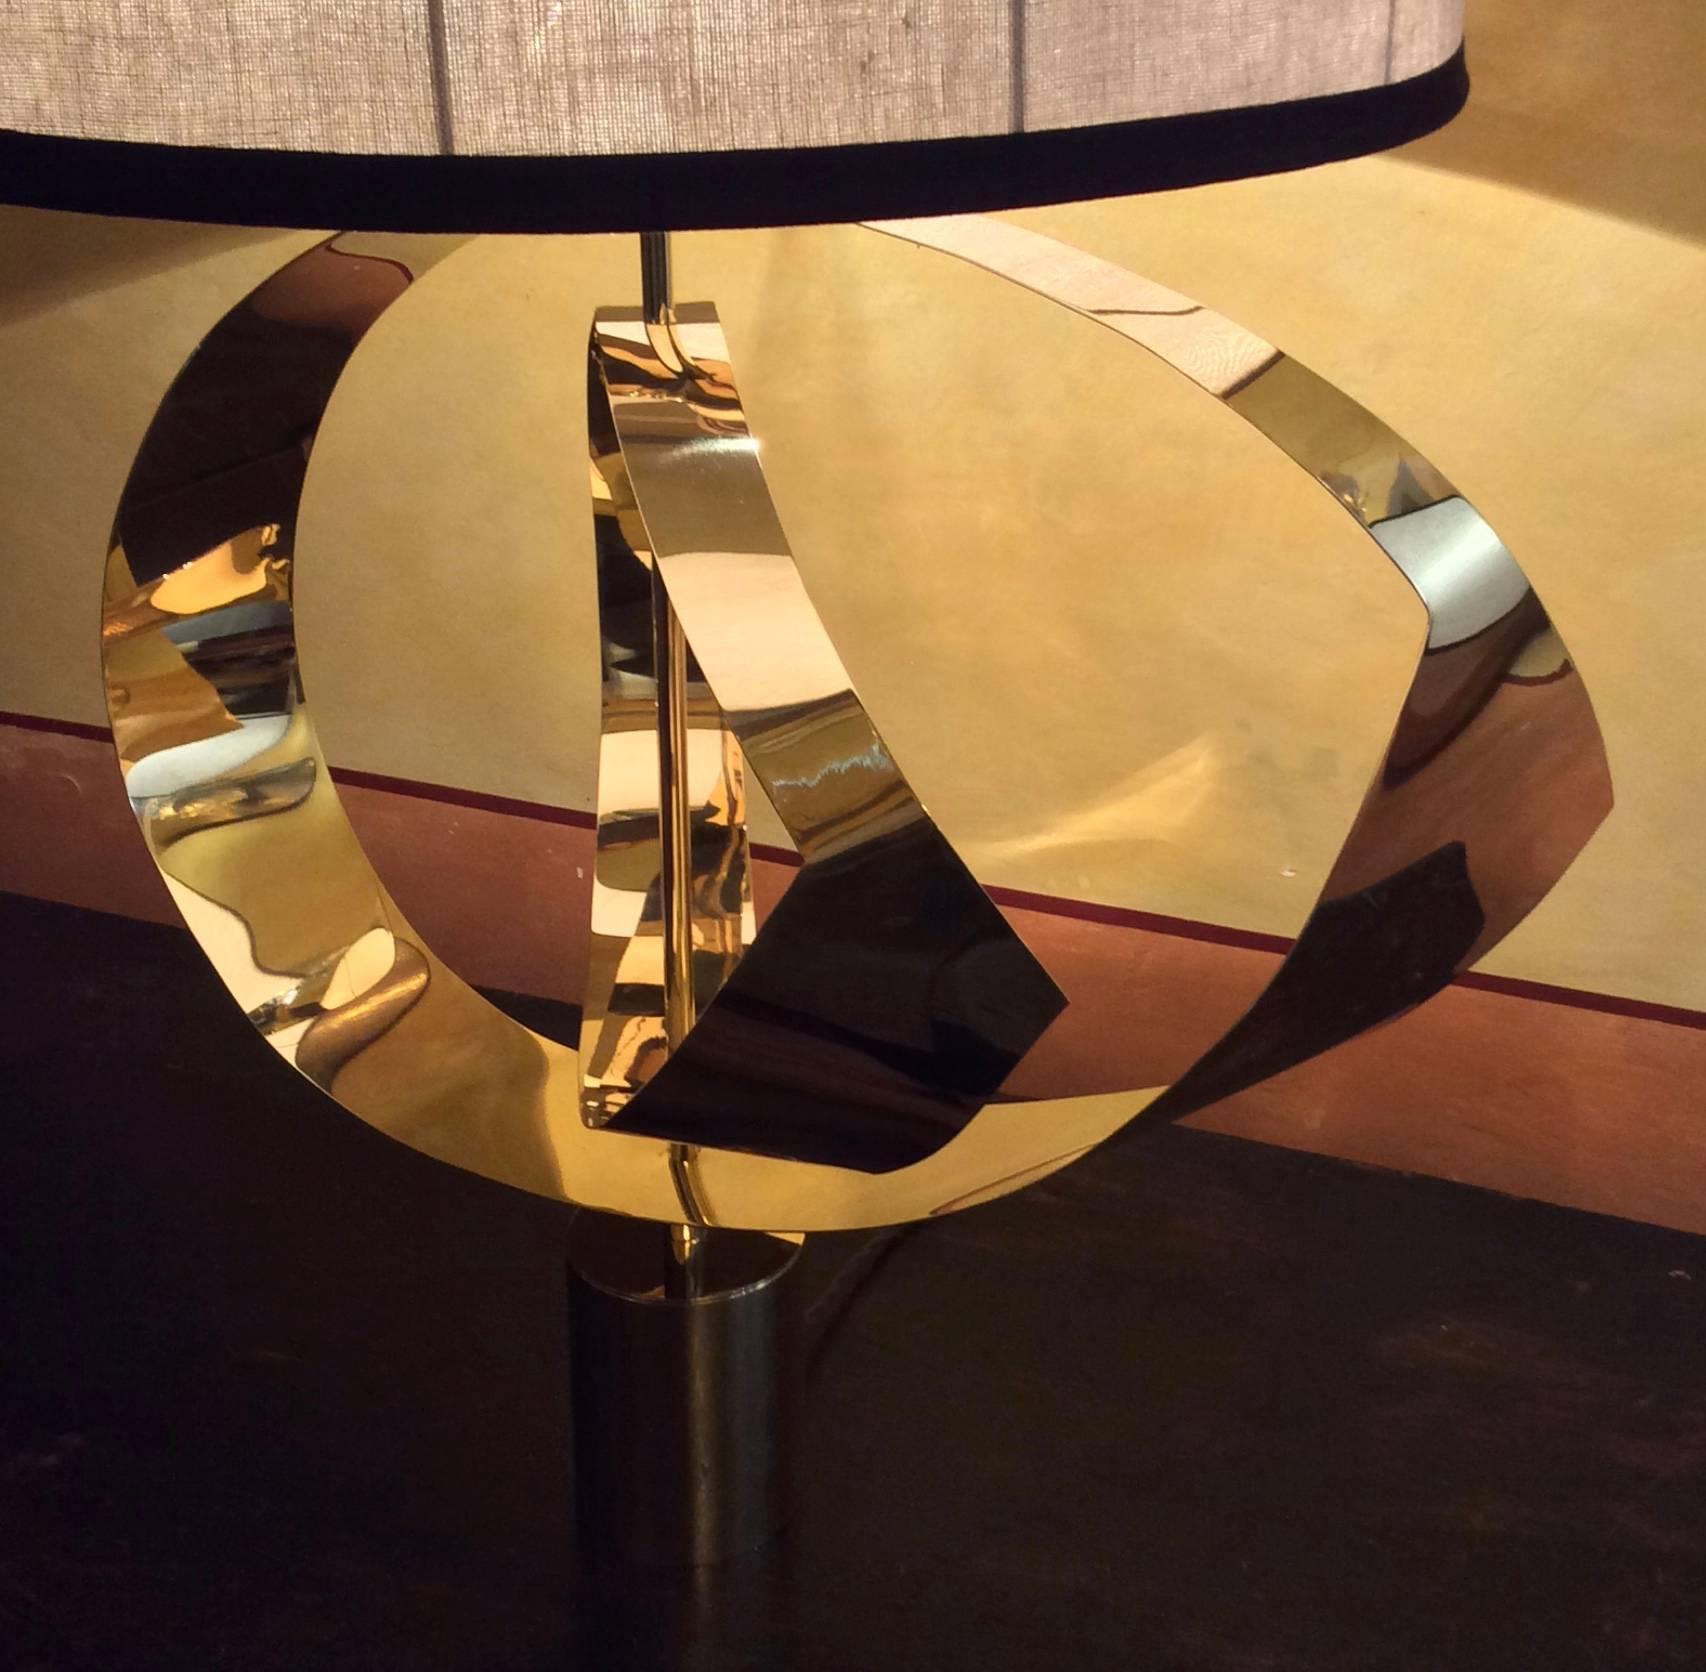 Rotating Ellipses in solid brass. Minimum opening: Depth 20.
Maximum opening: Depth 42 cm.
Shades are not Included. One E27 Light Bulb Each